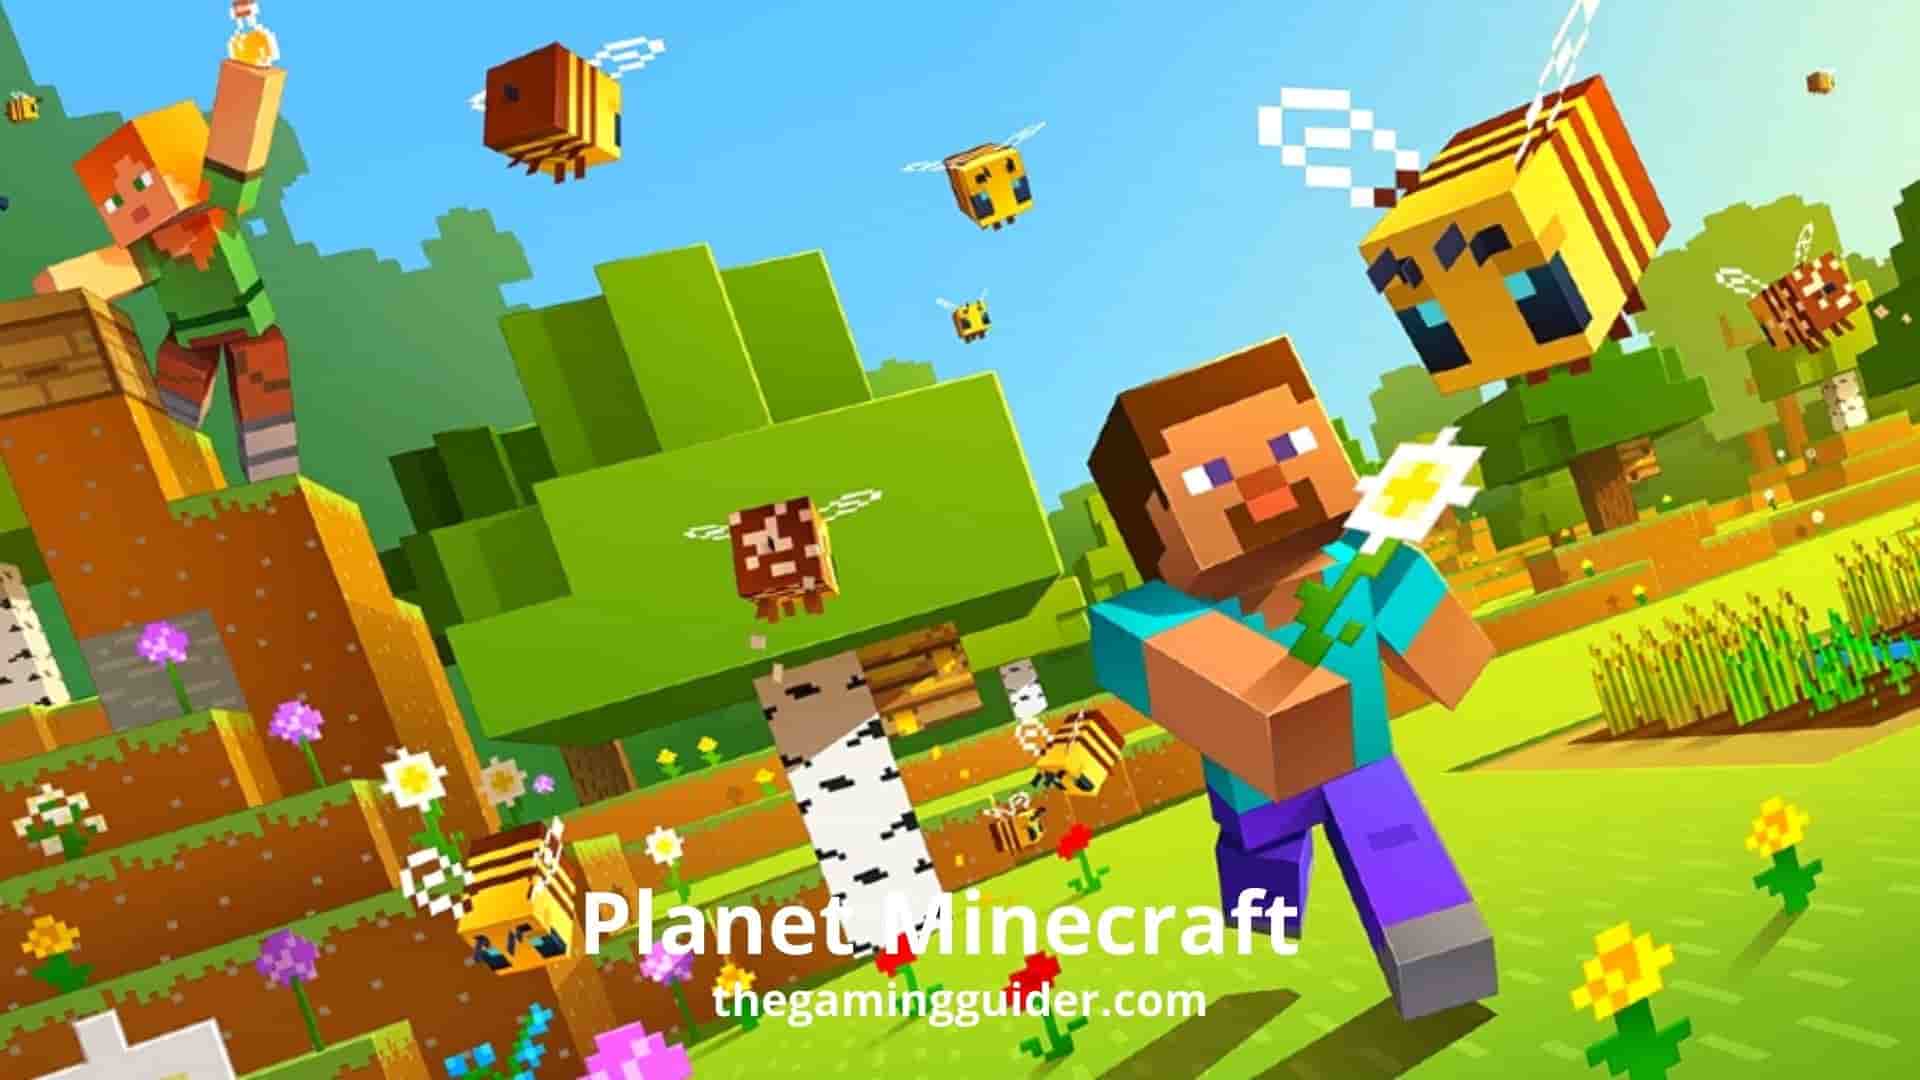 Planet Minecraft - the gaming guider.com